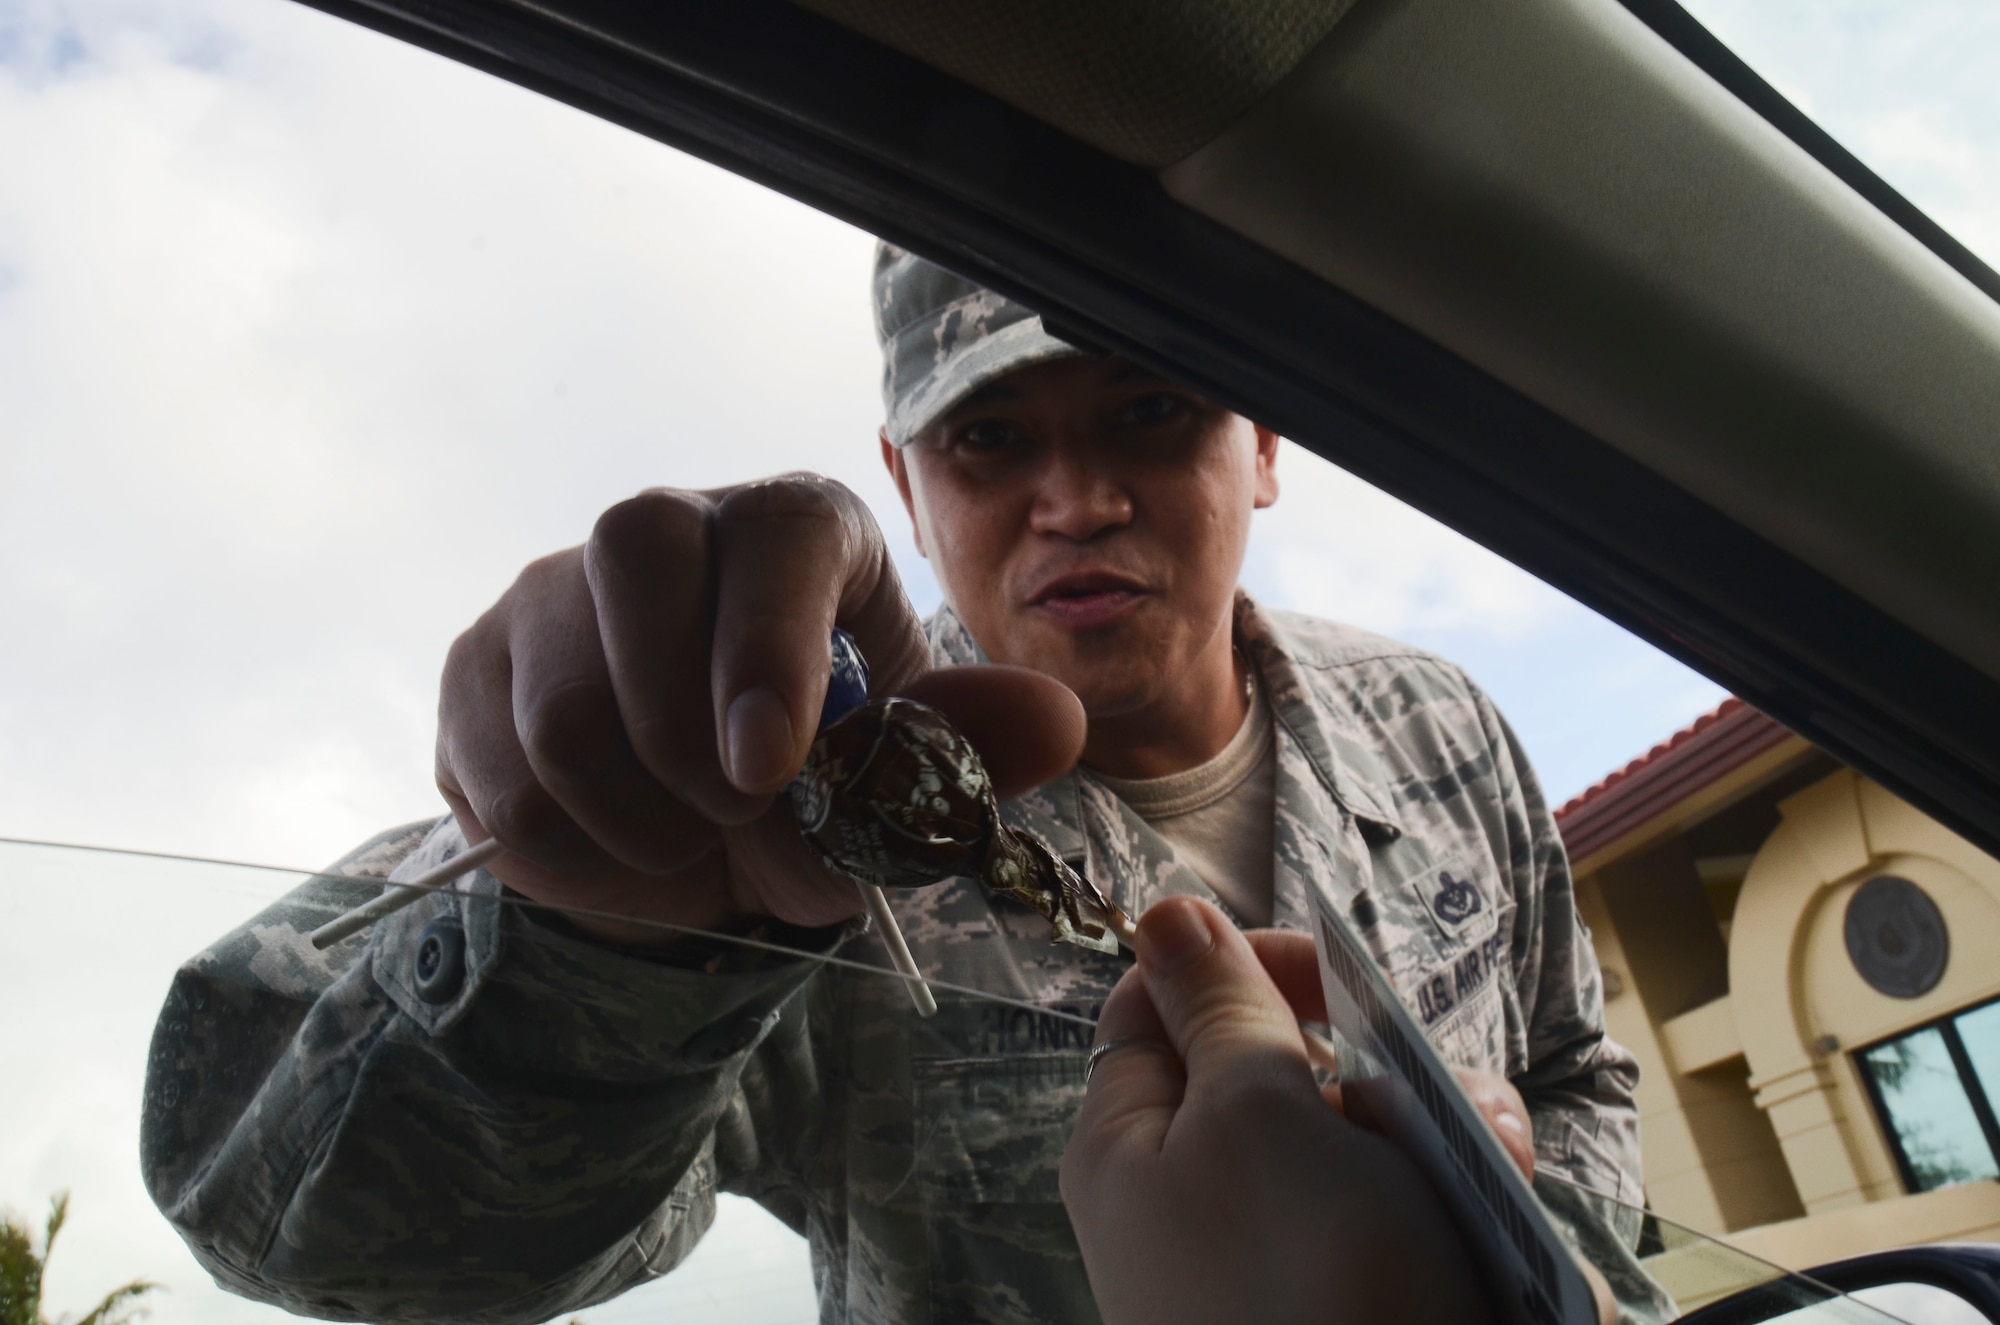 Master Sgt. Michael Honrado, 36th Civil Engineer Squadron, hands candy to a driver entering Andersen Air Force Base, Guam through the main gate May 22, 2014. Base senior leadership handed out candy advertising the Critical Days of Summer 2014 Theme "Risk:  Double Checks, Not Second Thoughts". (U.S. Air Force photo by Airman 1st Class Emily A. Bradley/Released)